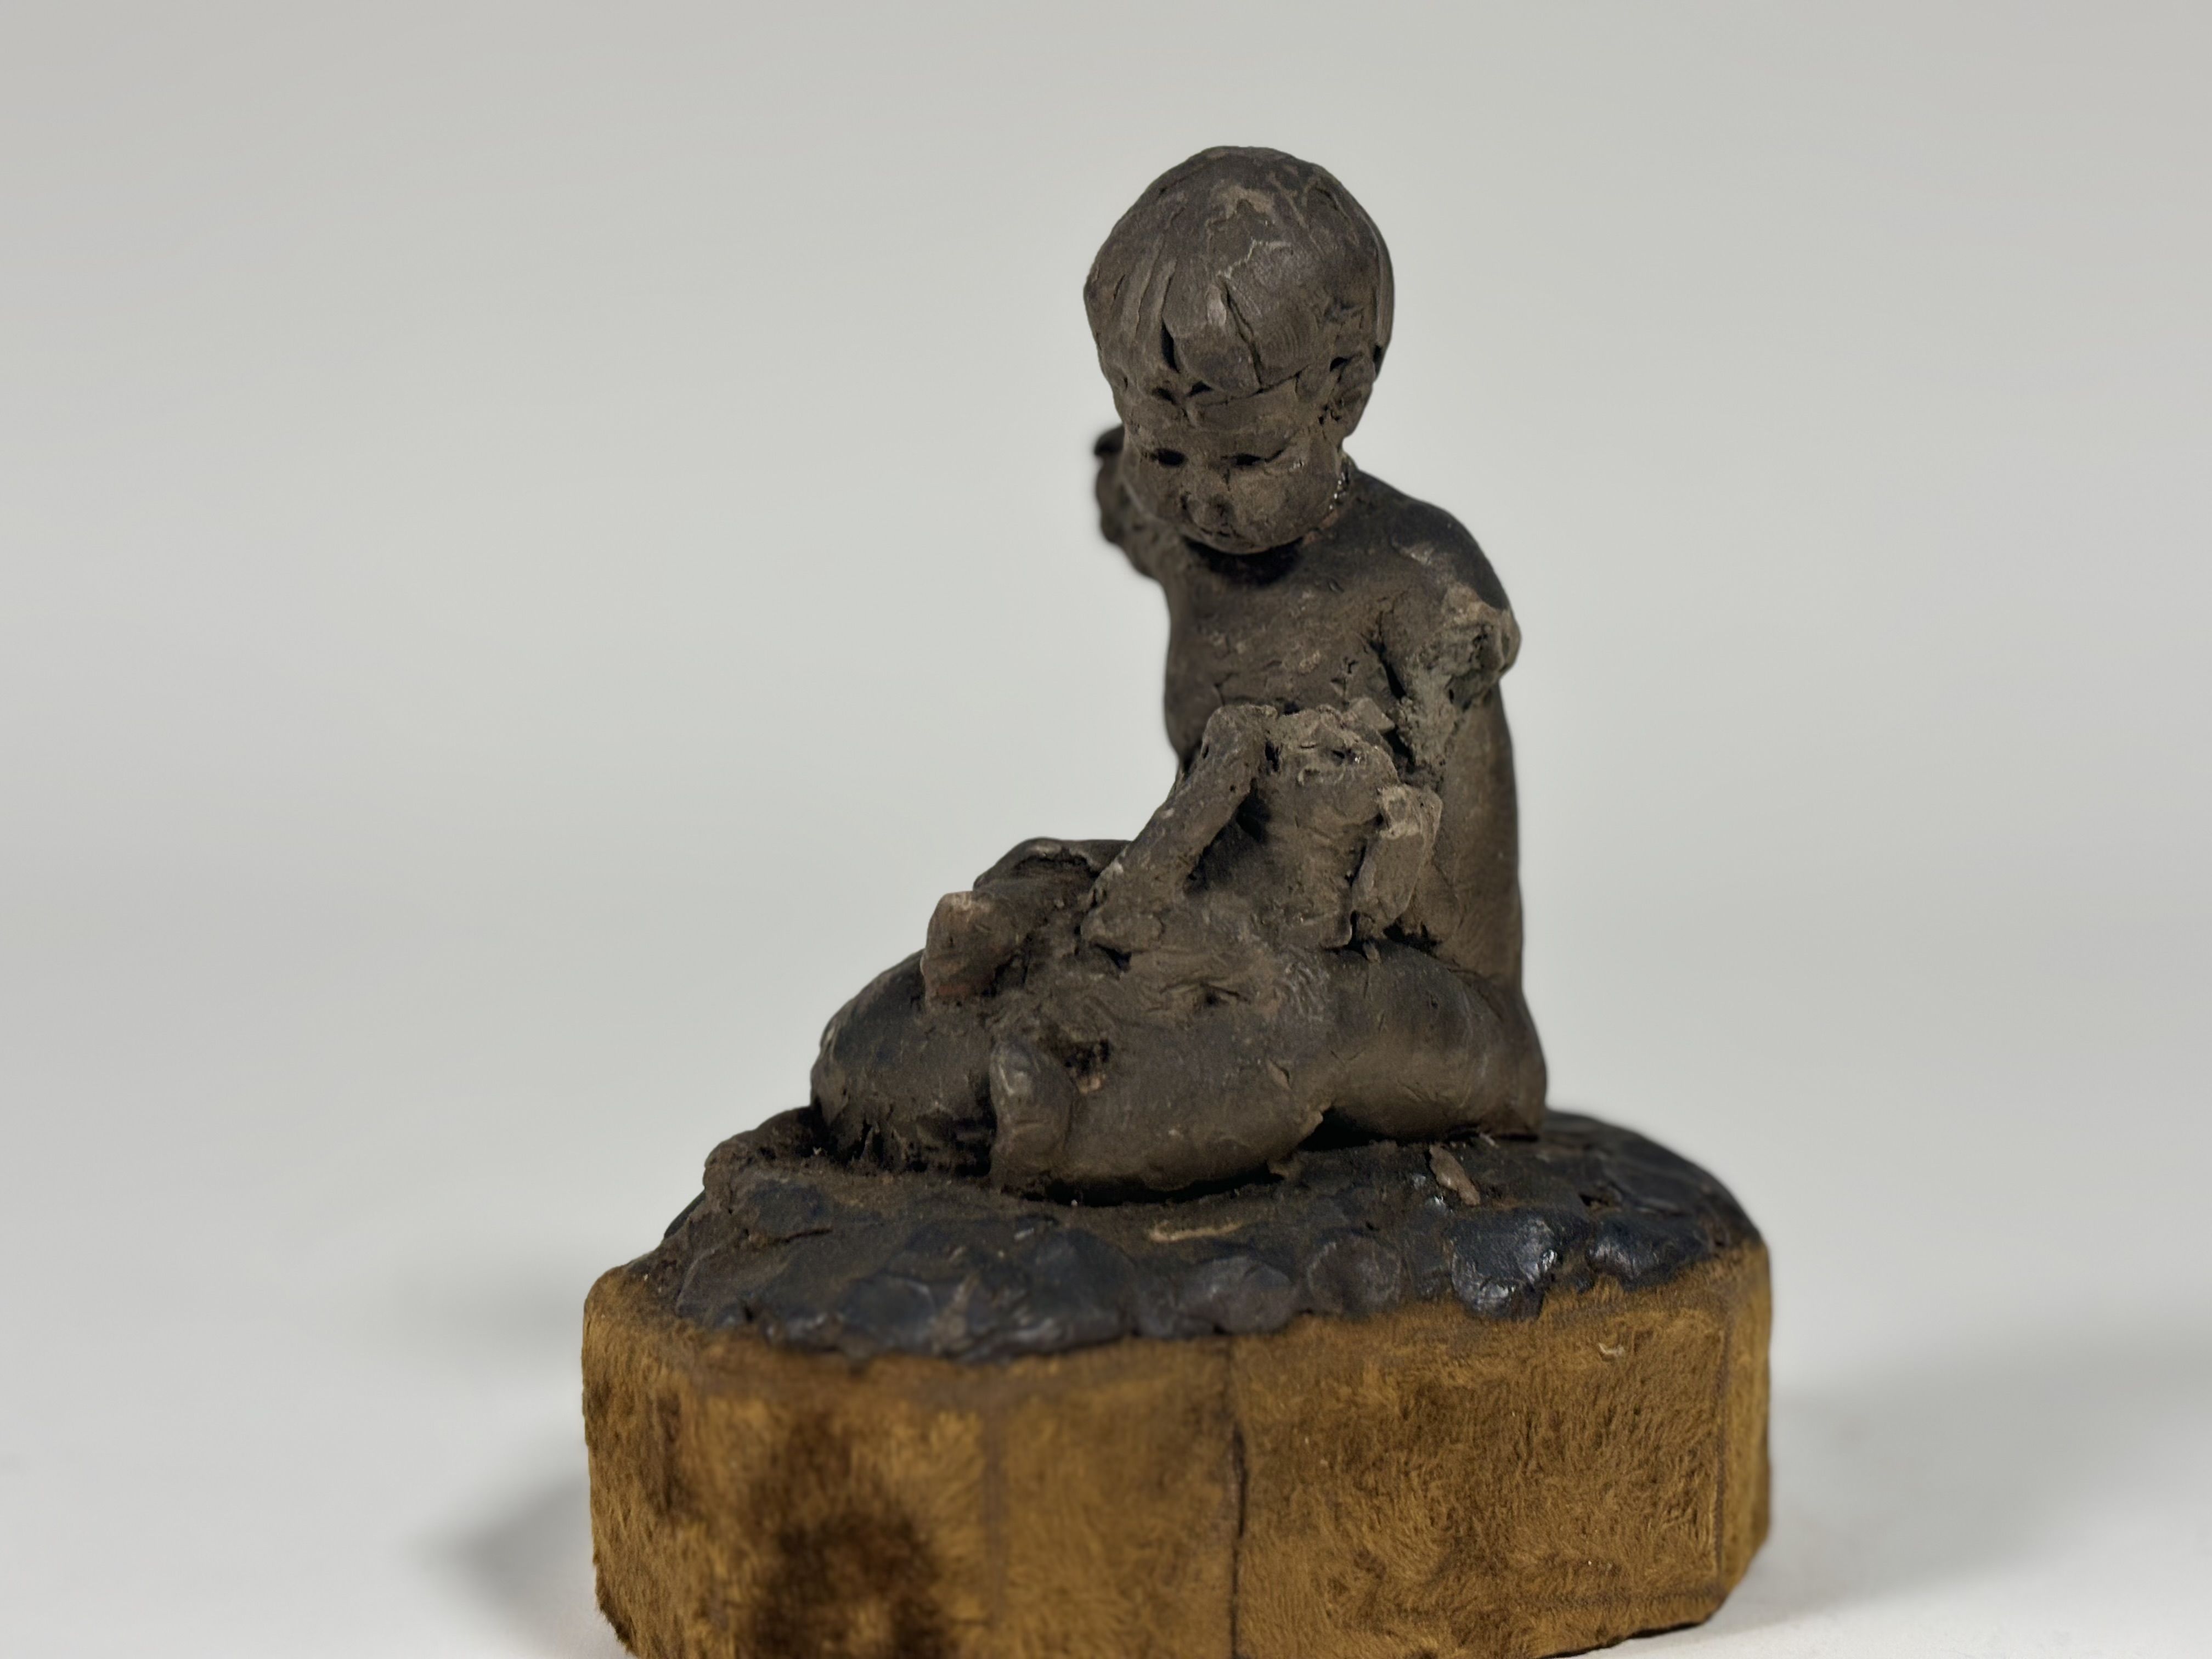 Attributed to Sophia Rosamond Praeger M.B.E. (Irish, 1867-1954), a wax maquette of a Child with a - Image 2 of 6